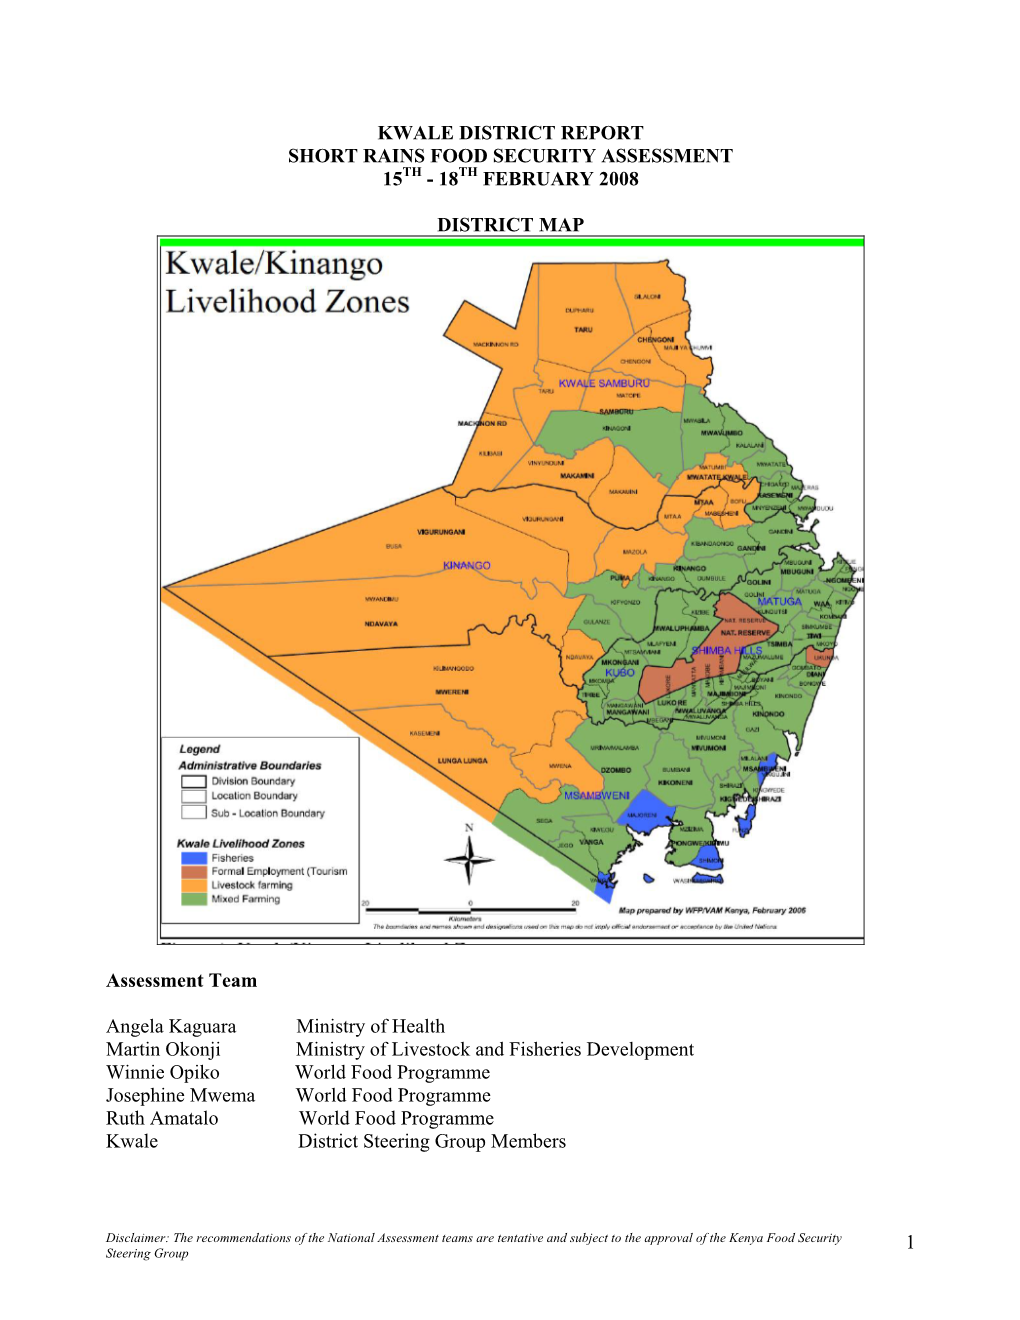 Kwale District Report Short Rains Food Security Assessment 15Th - 18Th February 2008